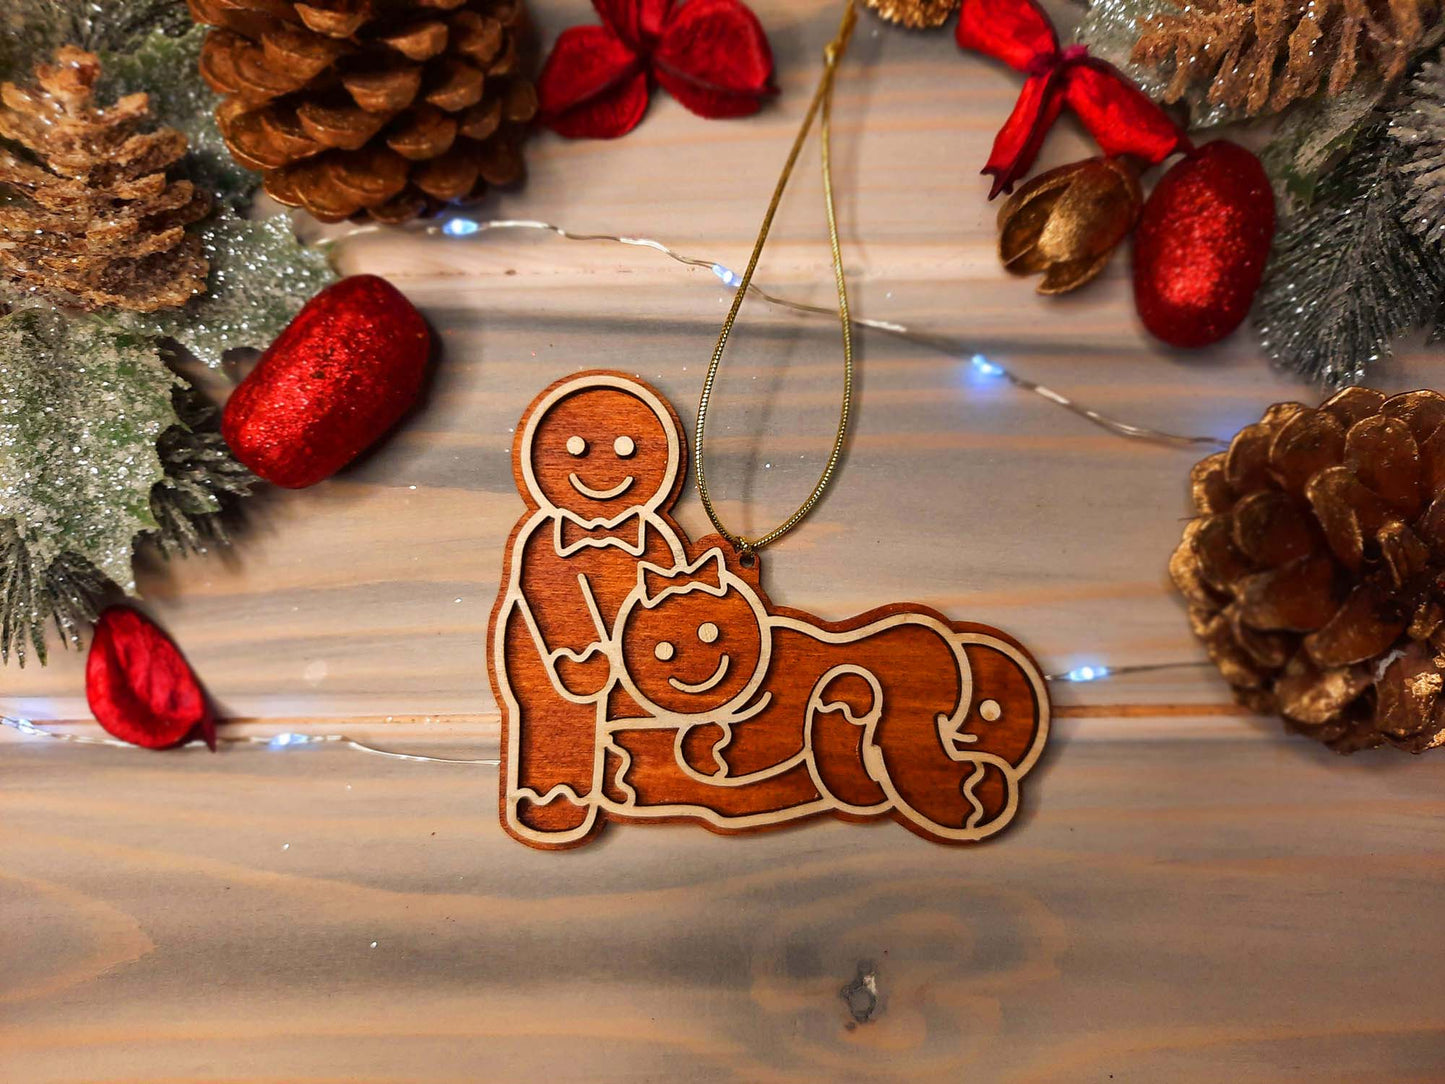 Threesome Sex Gingerbread - Christmas Decoration ver2 - PG Factory